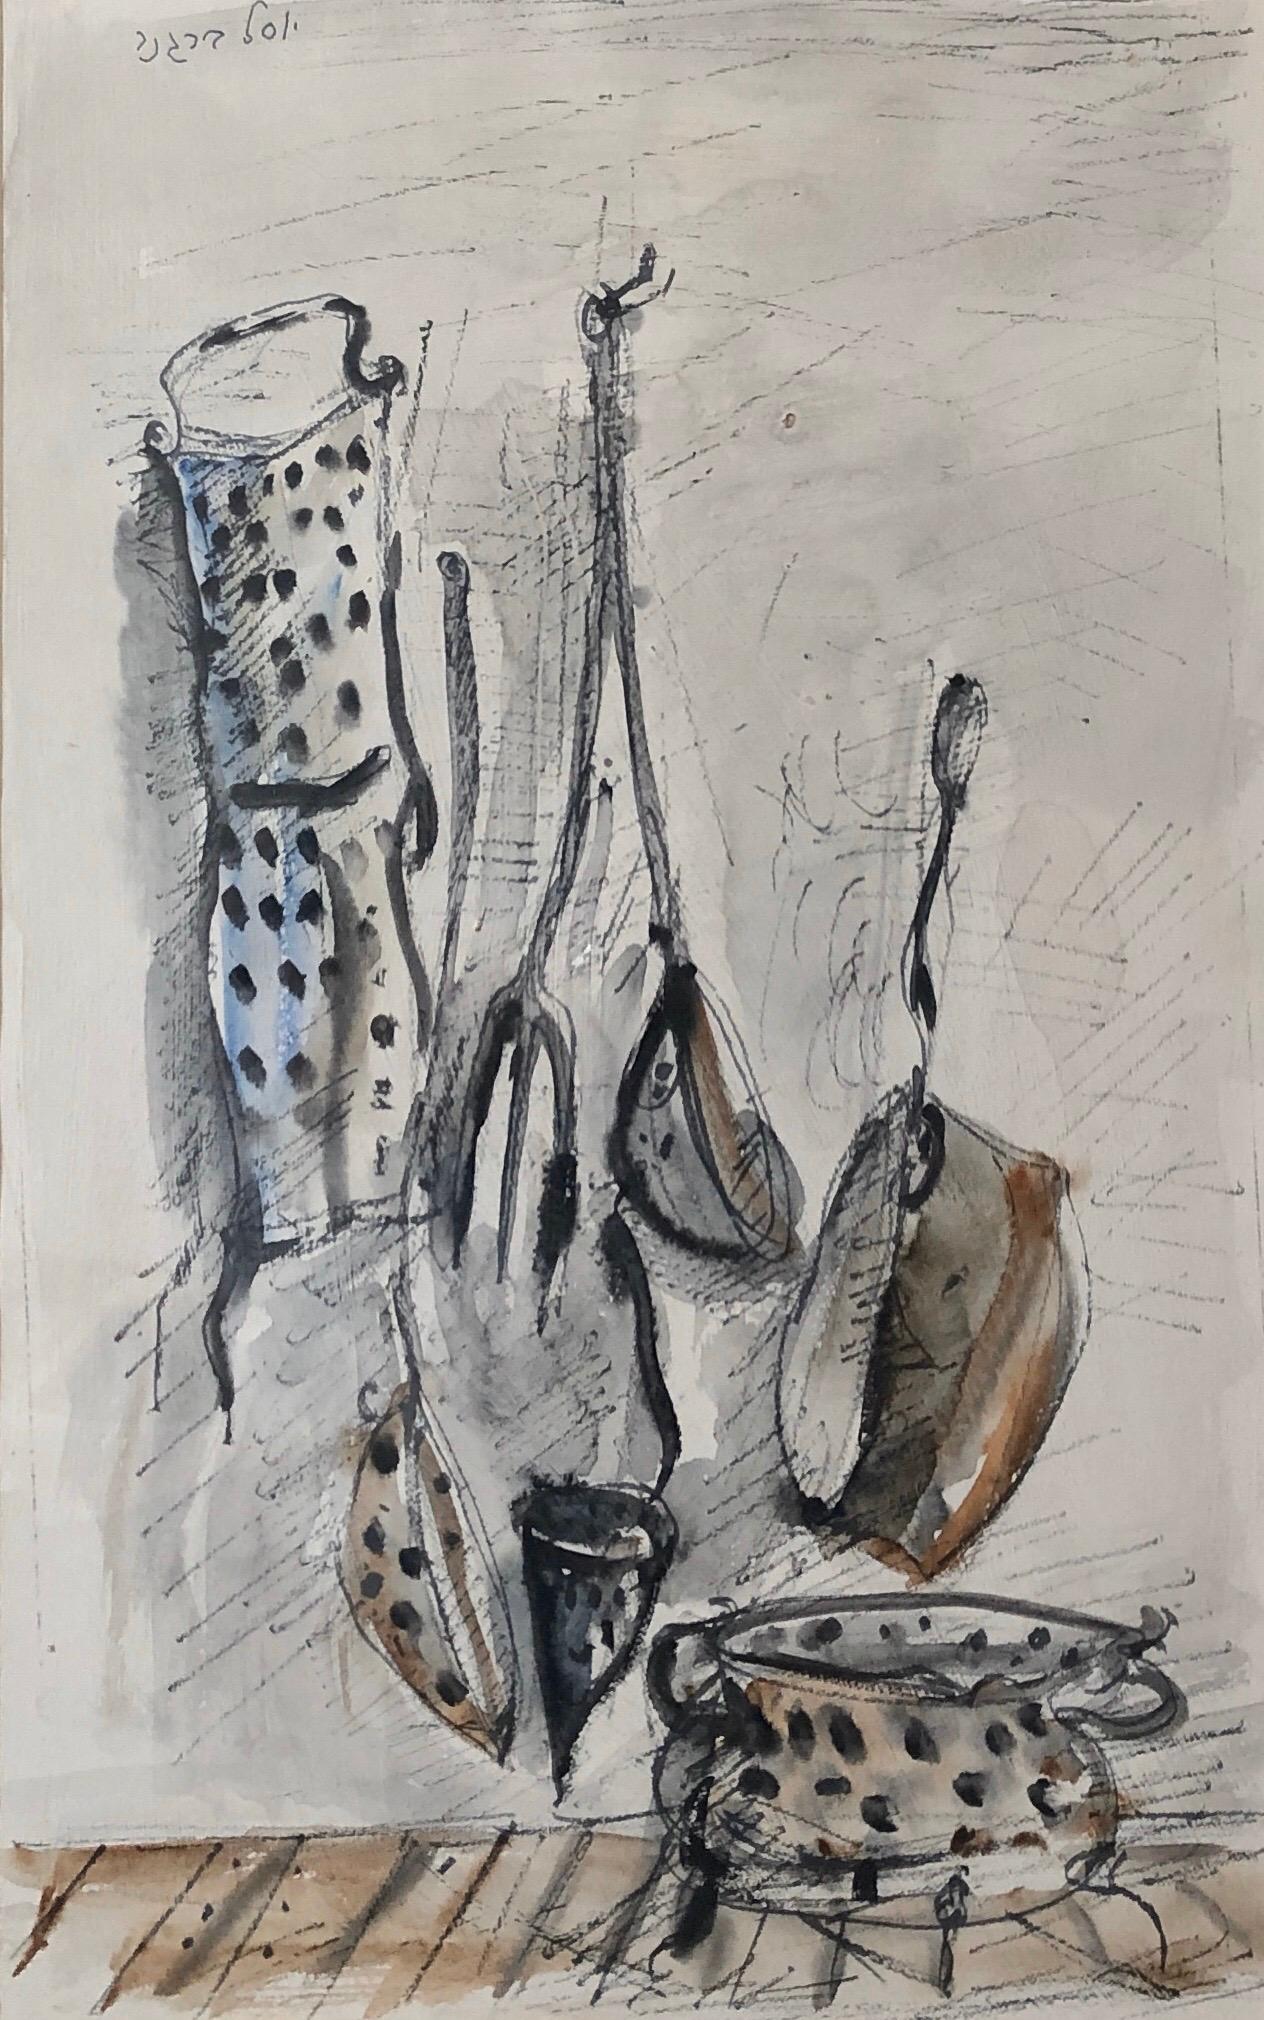 Abstract Composition, Kitchen Utensils.
Ink and watercolor of kitchen implements. Hand signed in Hebrew upper left. Dimensions: (Frame) H 25